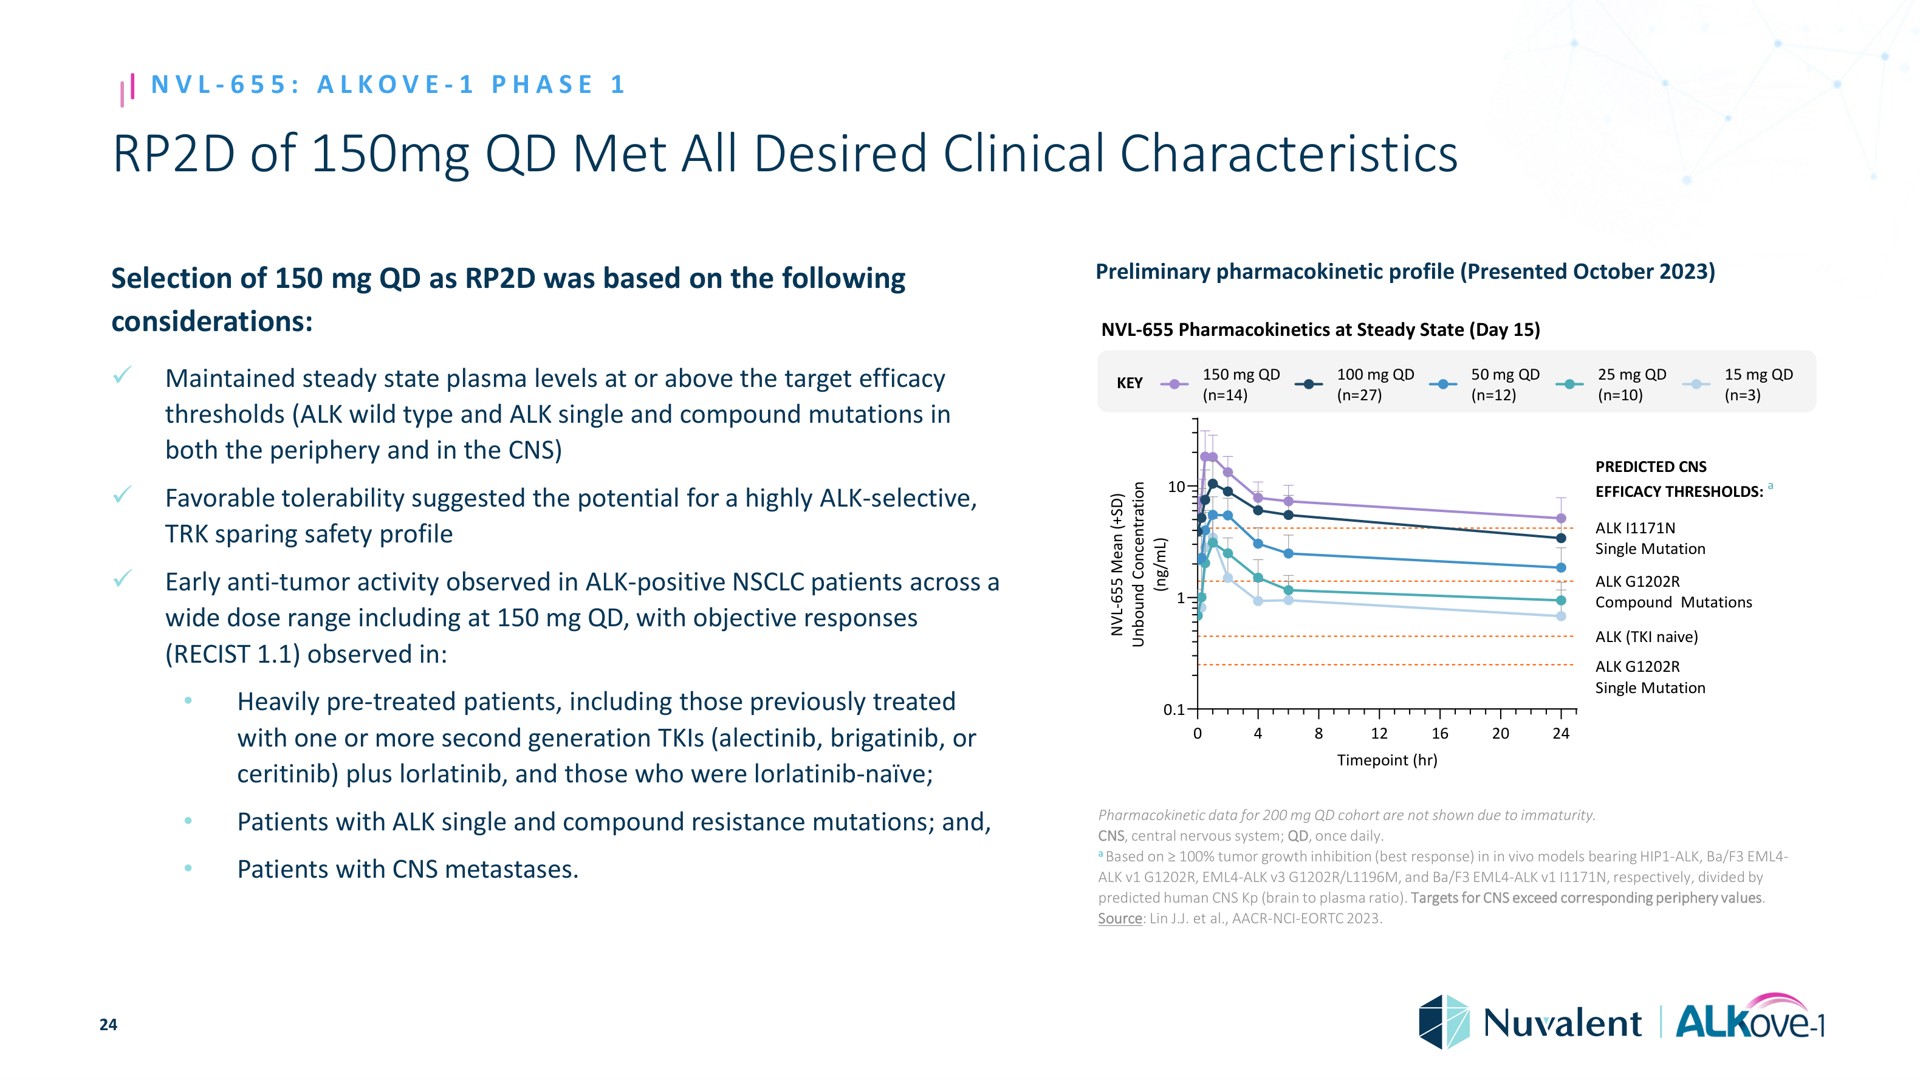 of met all desired clinical characteristics phase selection as was based on the following preliminary profile presented considerations maintained steady state plasma levels at or above the target efficacy thresholds alk wild type and alk single and compound mutations in both the periphery and in the at steady state day key favorable tolerability suggested the potential for a highly alk selective sparing safety profile early anti tumor activity observed in alk positive patients across a wide dose range including at with objective responses observed in a i a heavily treated patients including those previously treated with one or more second generation or plus and those who were naive a patients with alk single and compound resistance mutations and are not shown due to predicted efficacy thresholds alk single mutation alk compound mutations alk naive alk single mutation patients with metastases in in models bearing hip alk divided by a alk respectively a ratio targets for exceed corresponding periphery values | Nuvalent